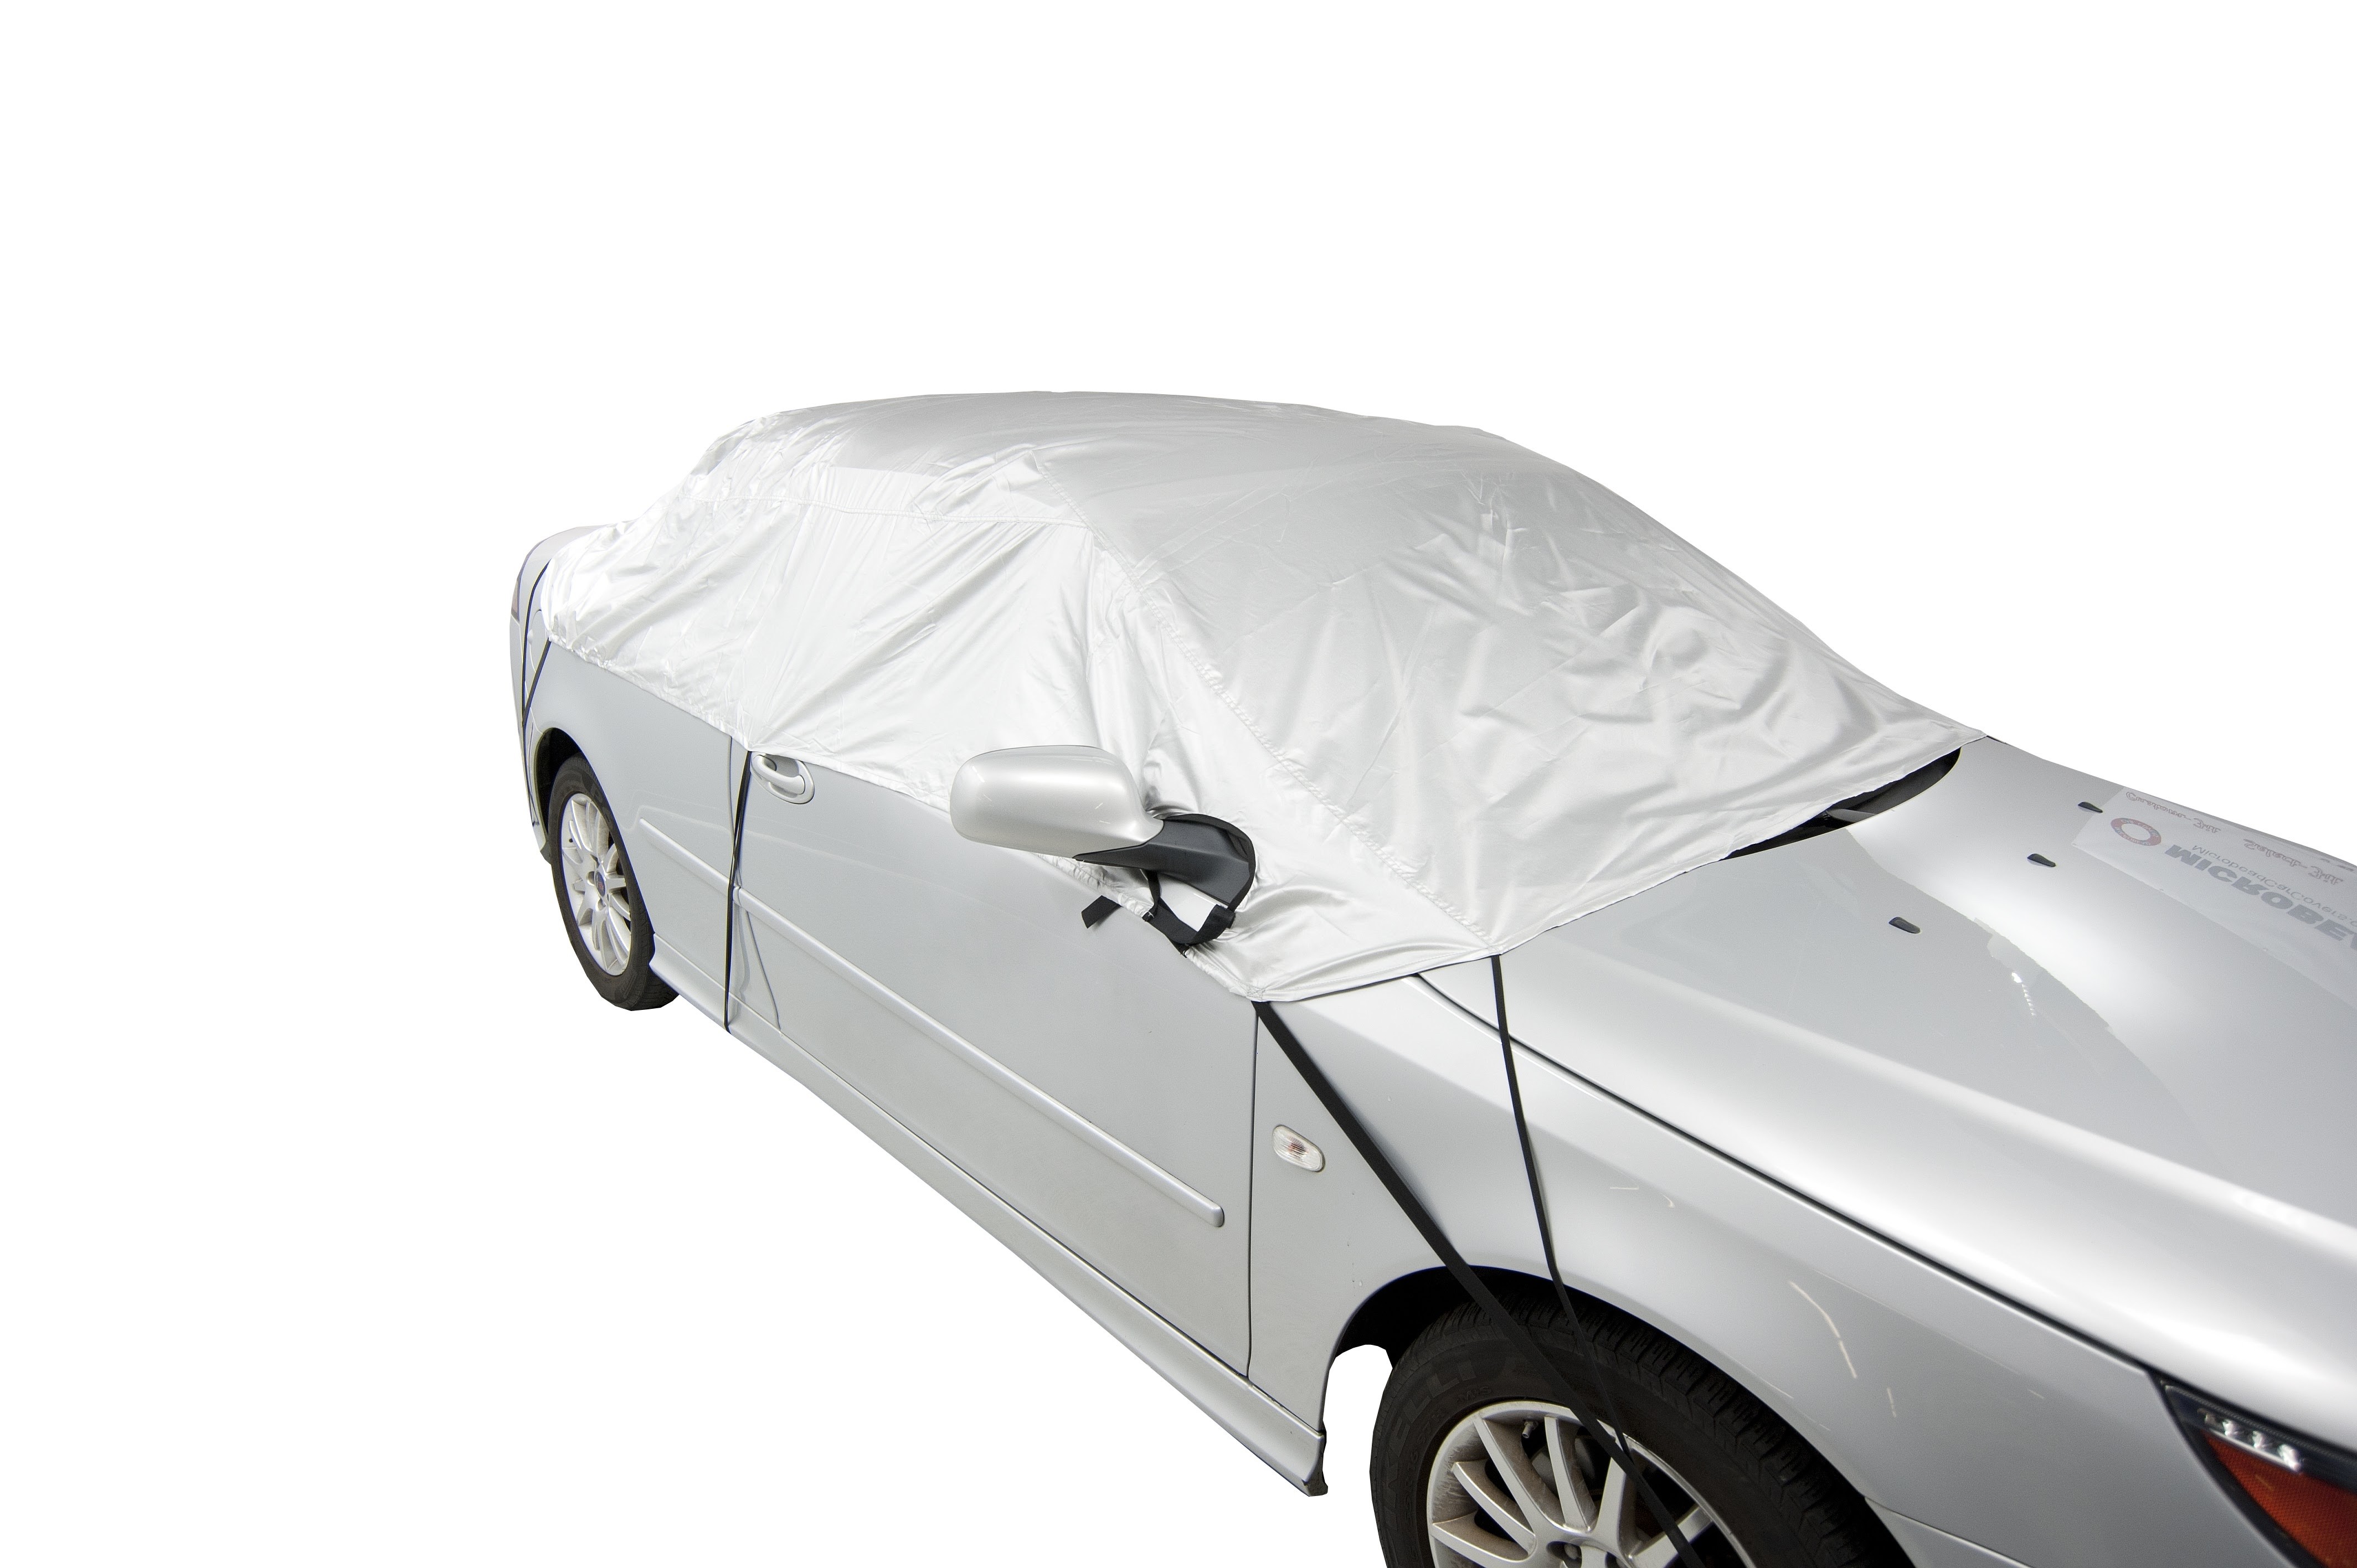 StateOfNine NEW & Improved! 4G Saab Water Resistant Convertible Top Cover Car Cover For Saab 9 3 Convertible